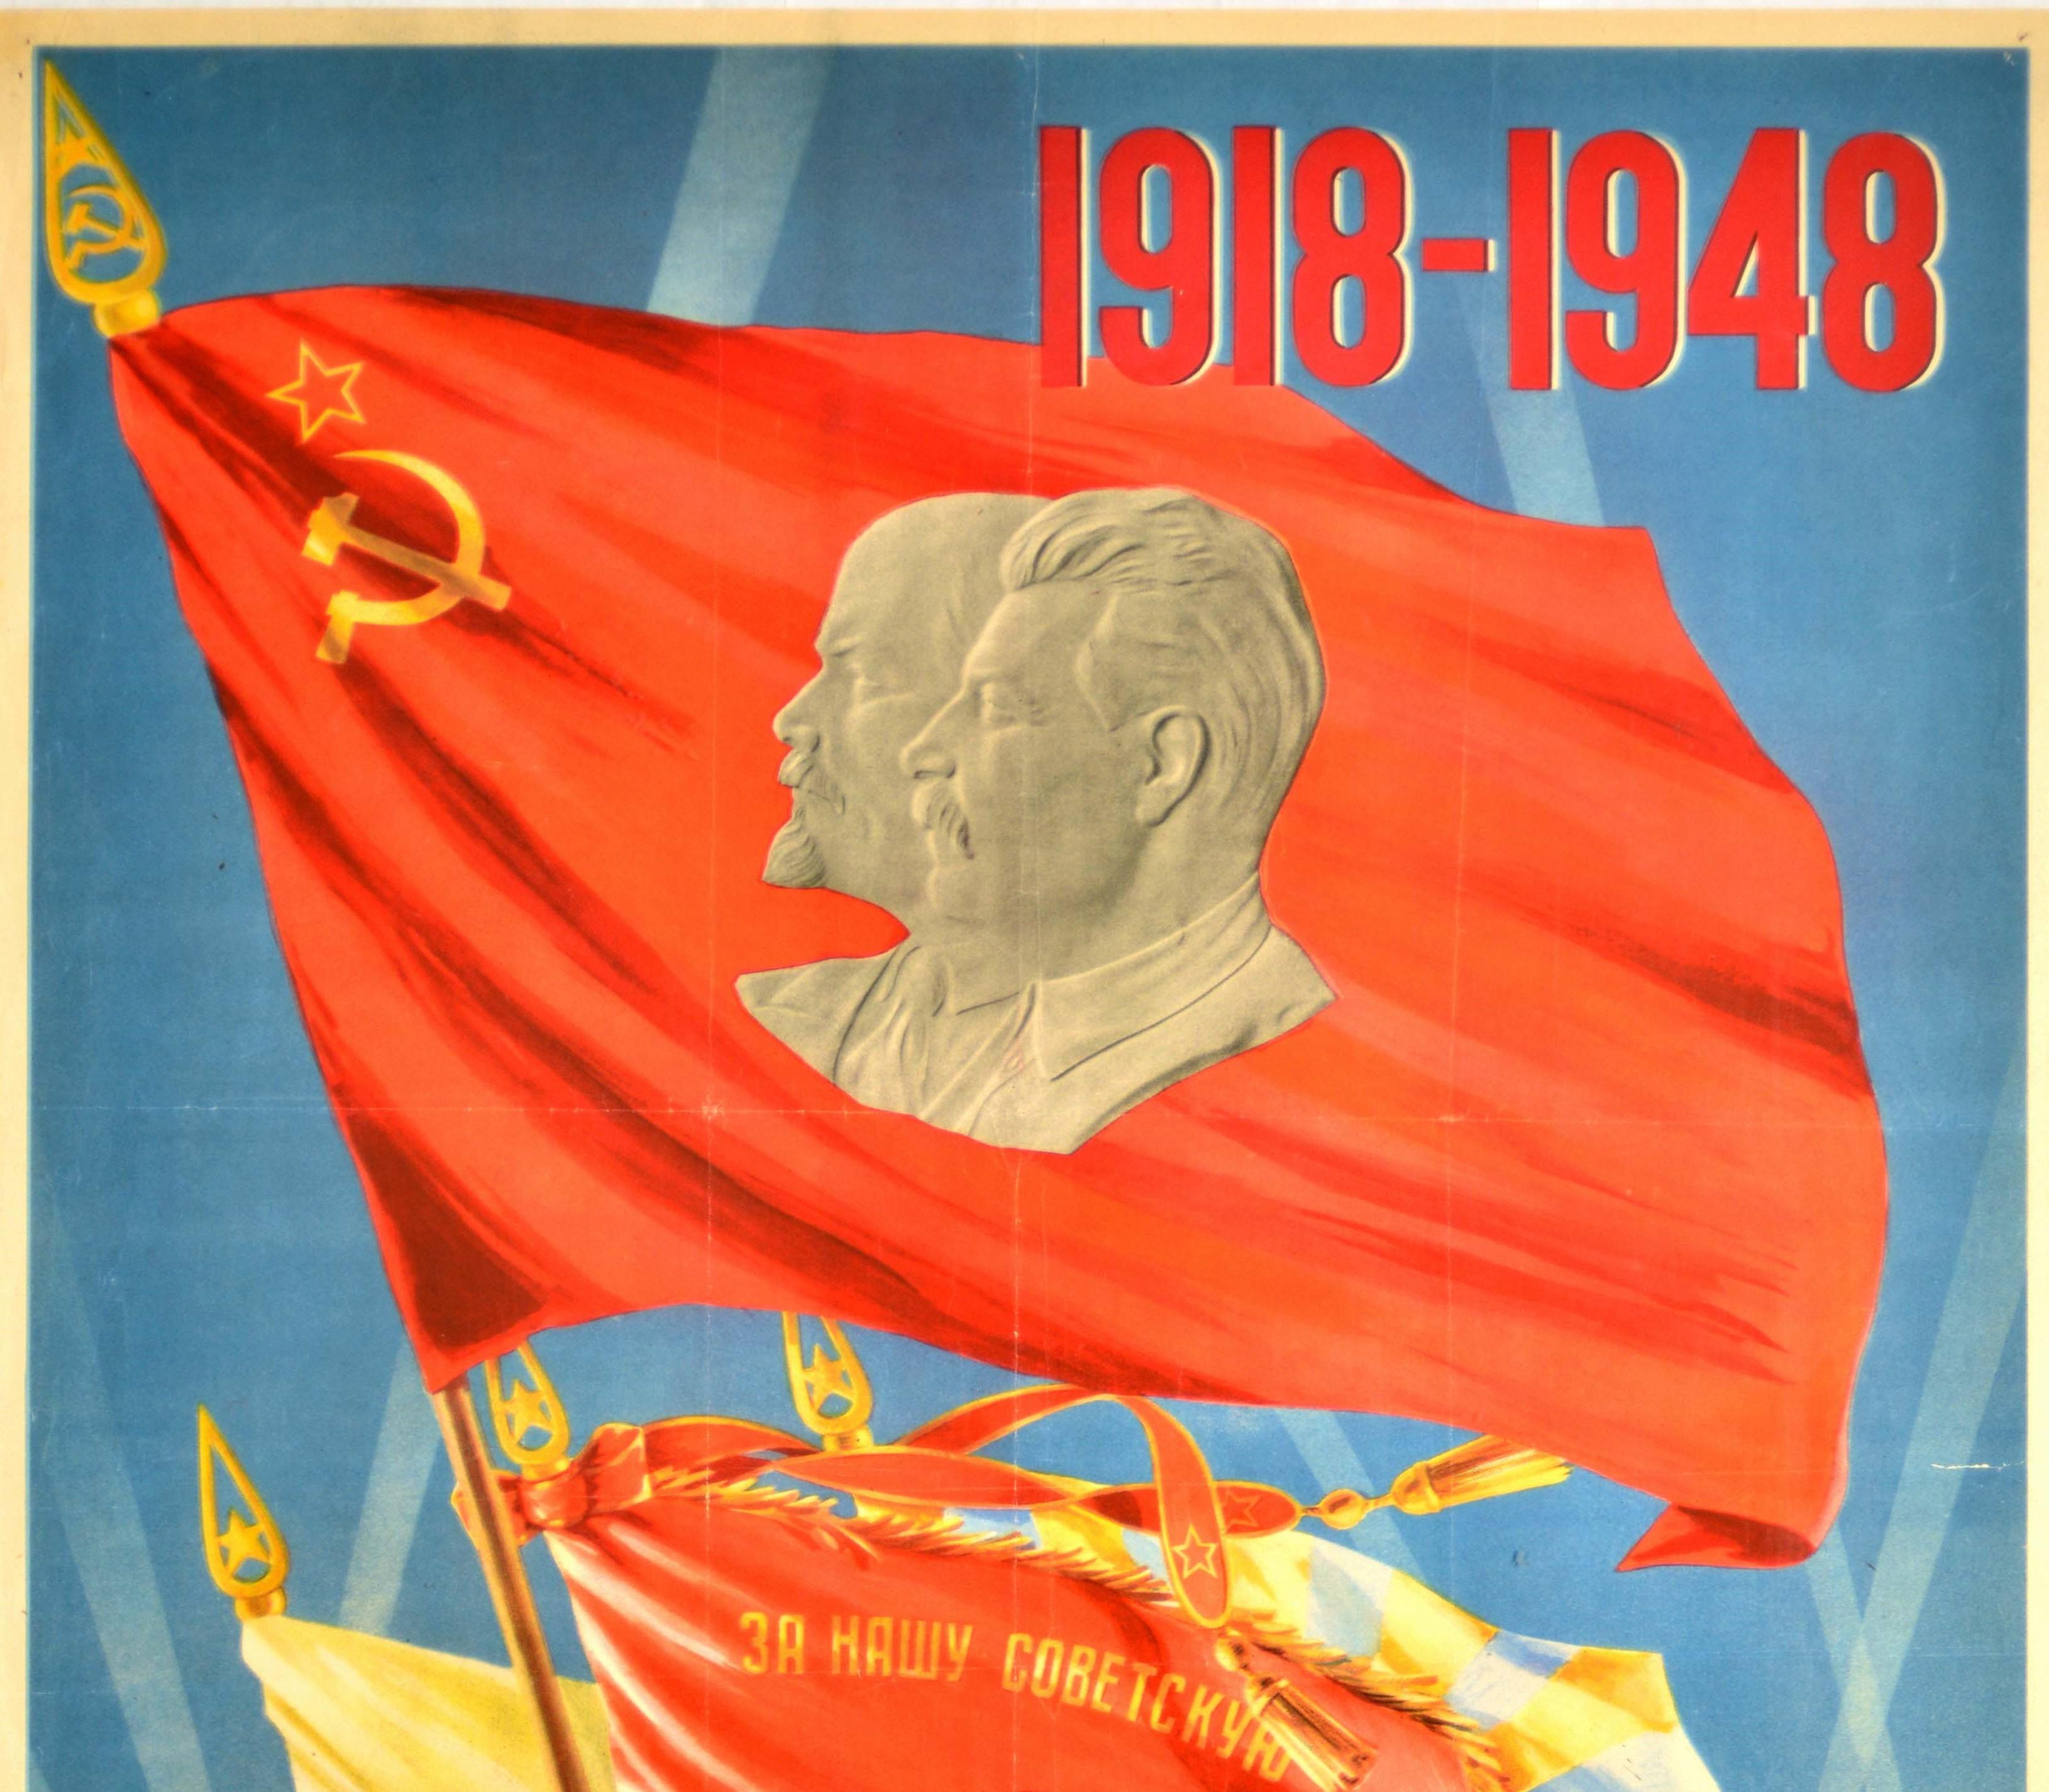 Original vintage Soviet propaganda poster marked with the dates 1918-1948 and slogan - Glory to the Party of Lenin and Stalin the organiser of the victorious armed forces of the USSR! - featuring patriotic artwork of a red flag with the Hammer and